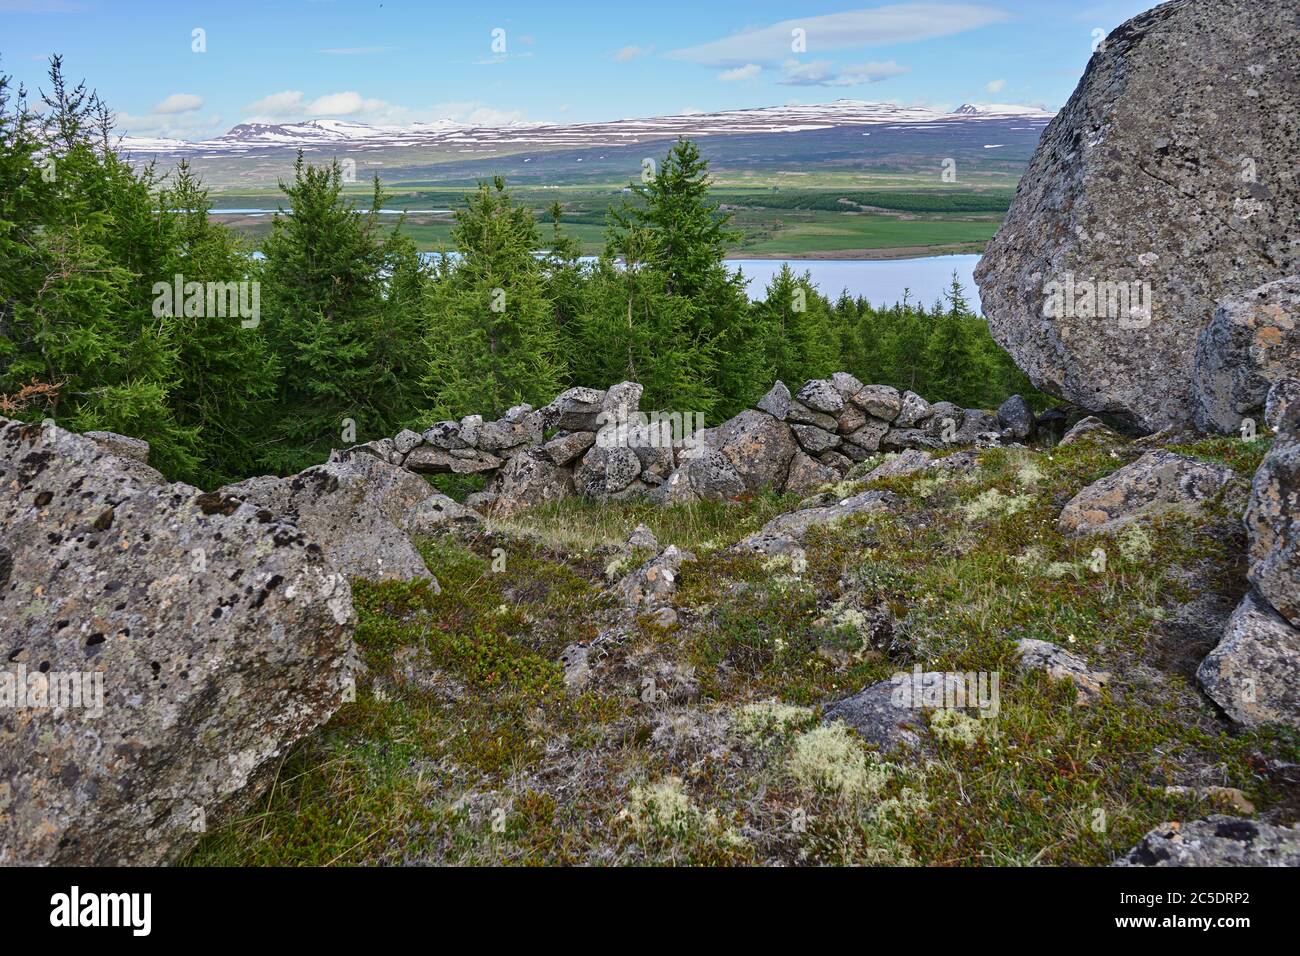 Basalt rock formations and trees by an old stone wall marking the border of Skógargerdi, a traditional farm by lake Lagarfljot in eastern Iceland Stock Photo